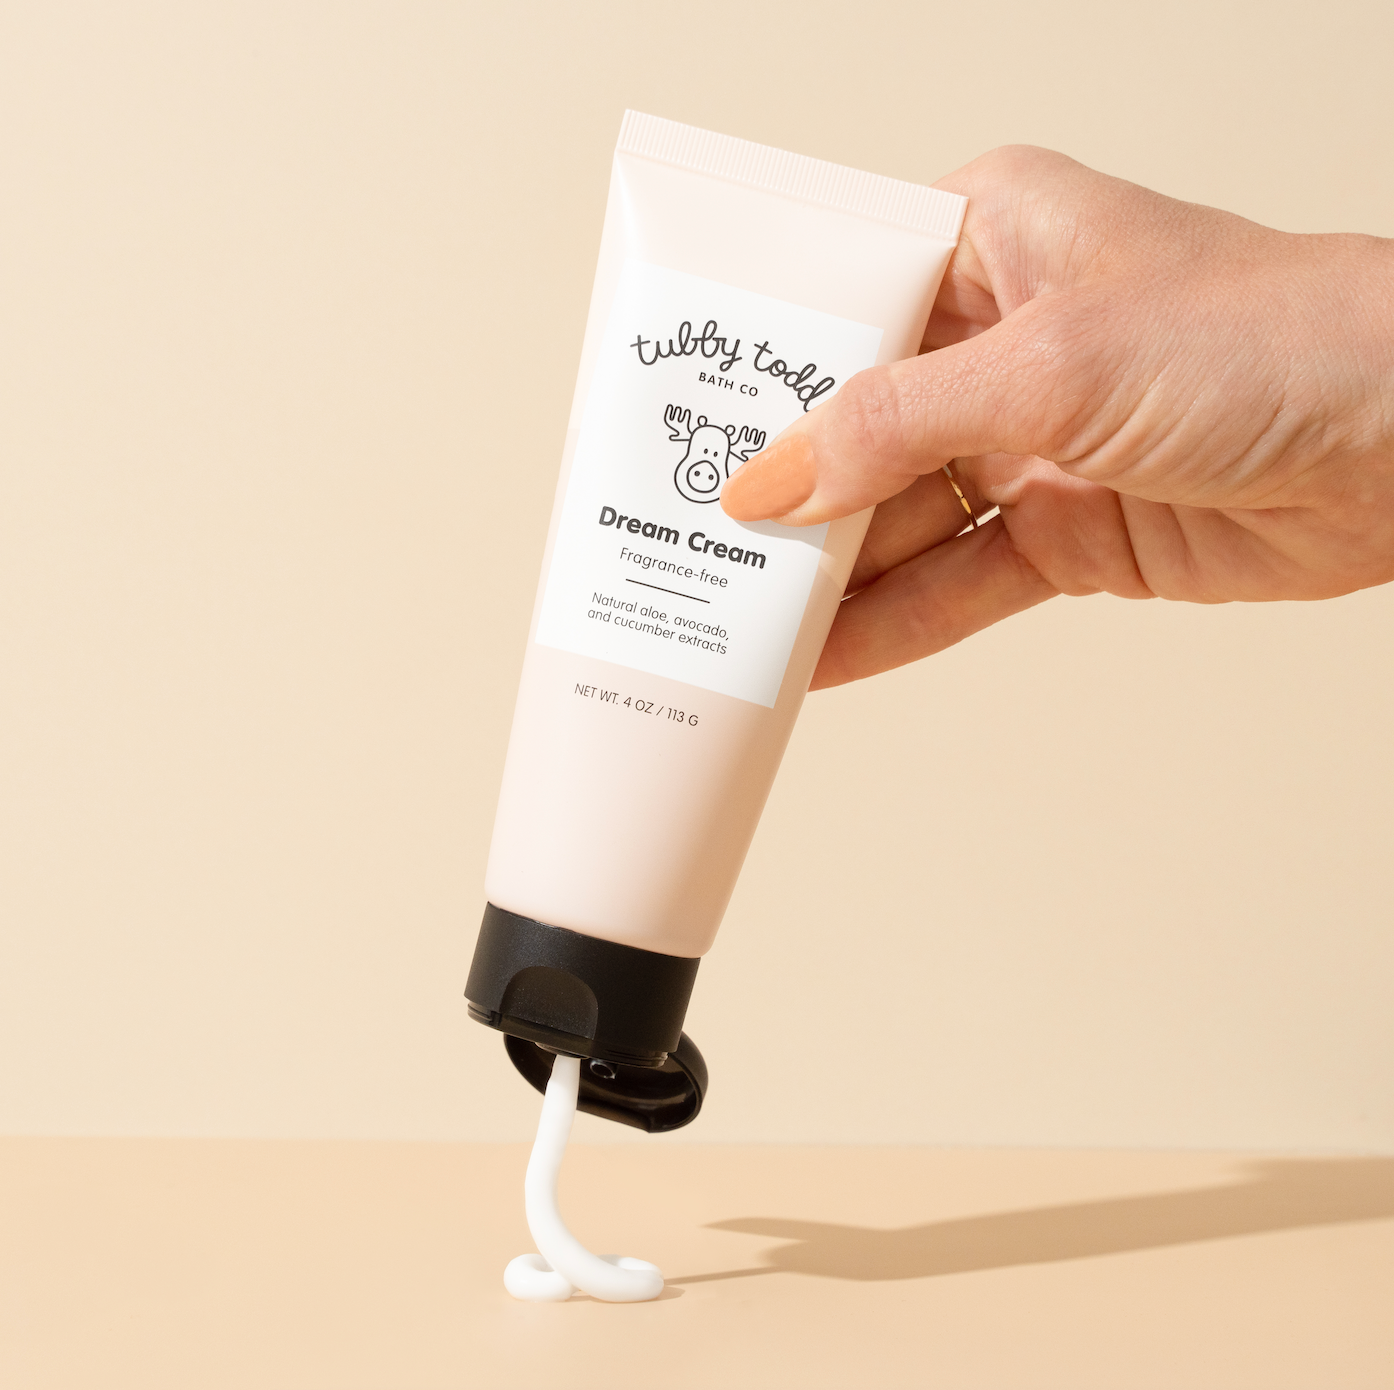 hand squeezing out Fragrance-free Dream Cream